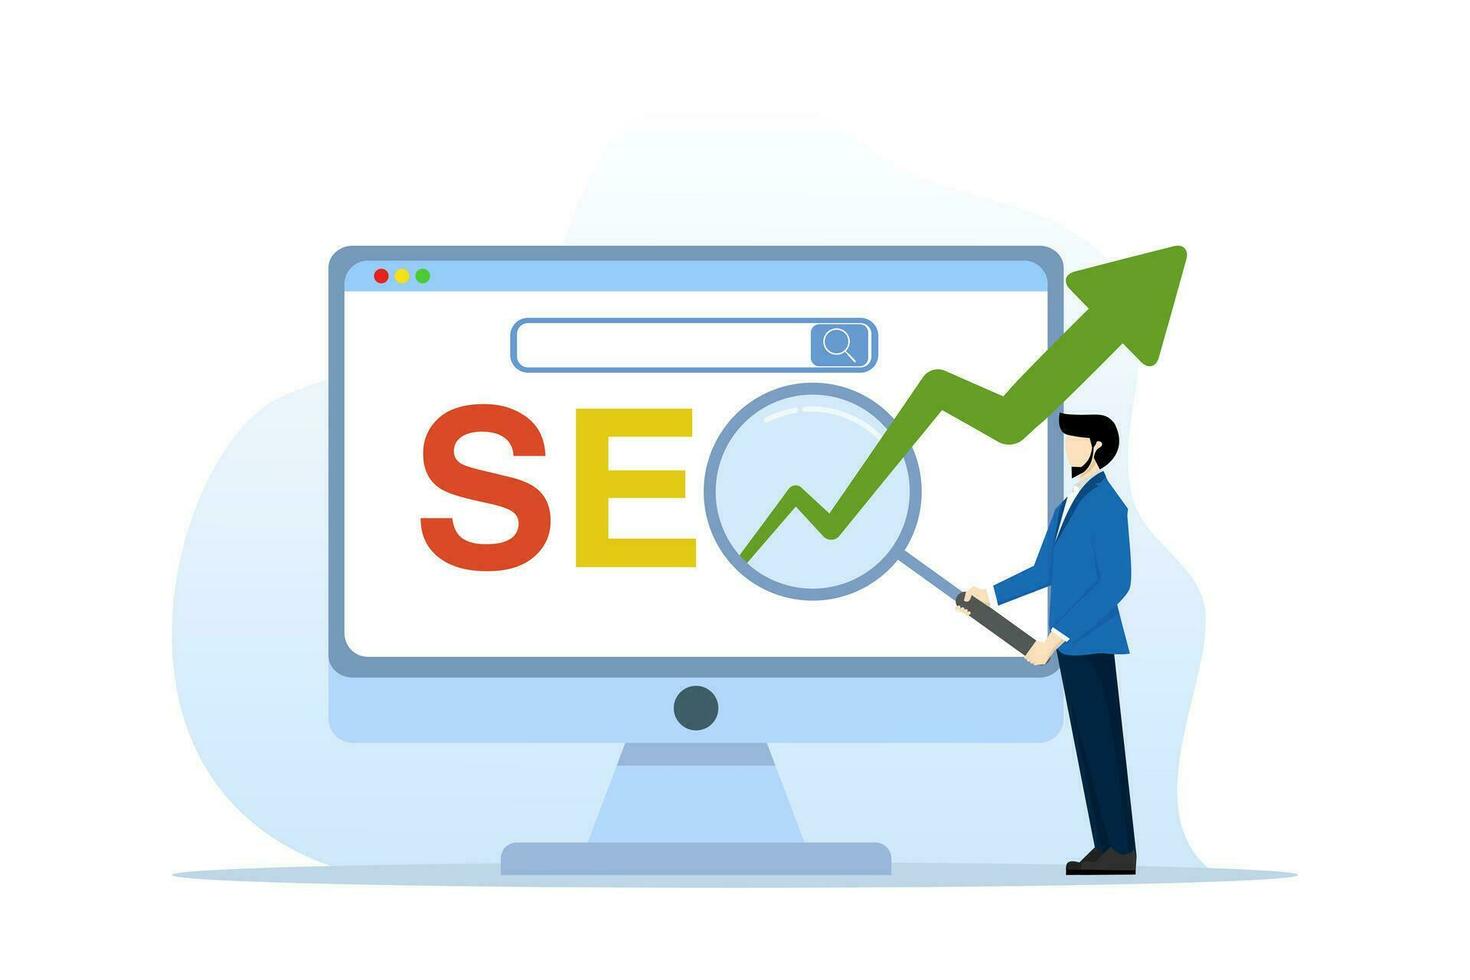 SEO or Search Engine Optimization concept, website search results, advertising or marketing to improve web ranking or user discovery concept, team analysis to optimize SEO. flat vector illustration.